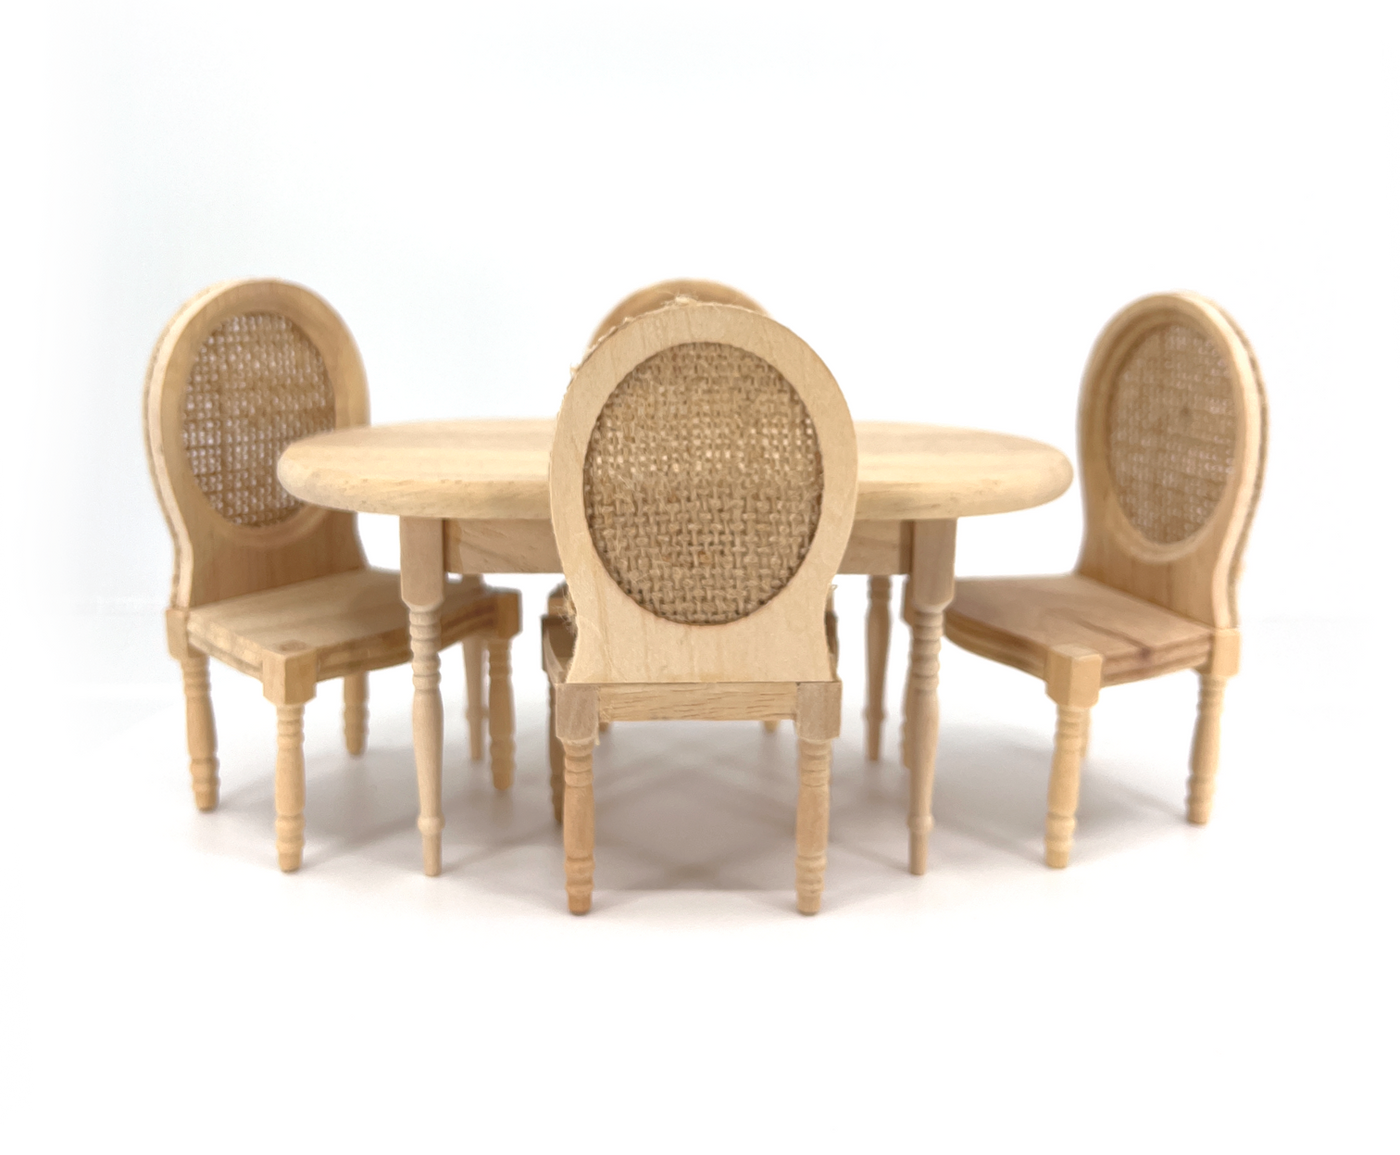 Miniature French Dining Table with 4 chairs